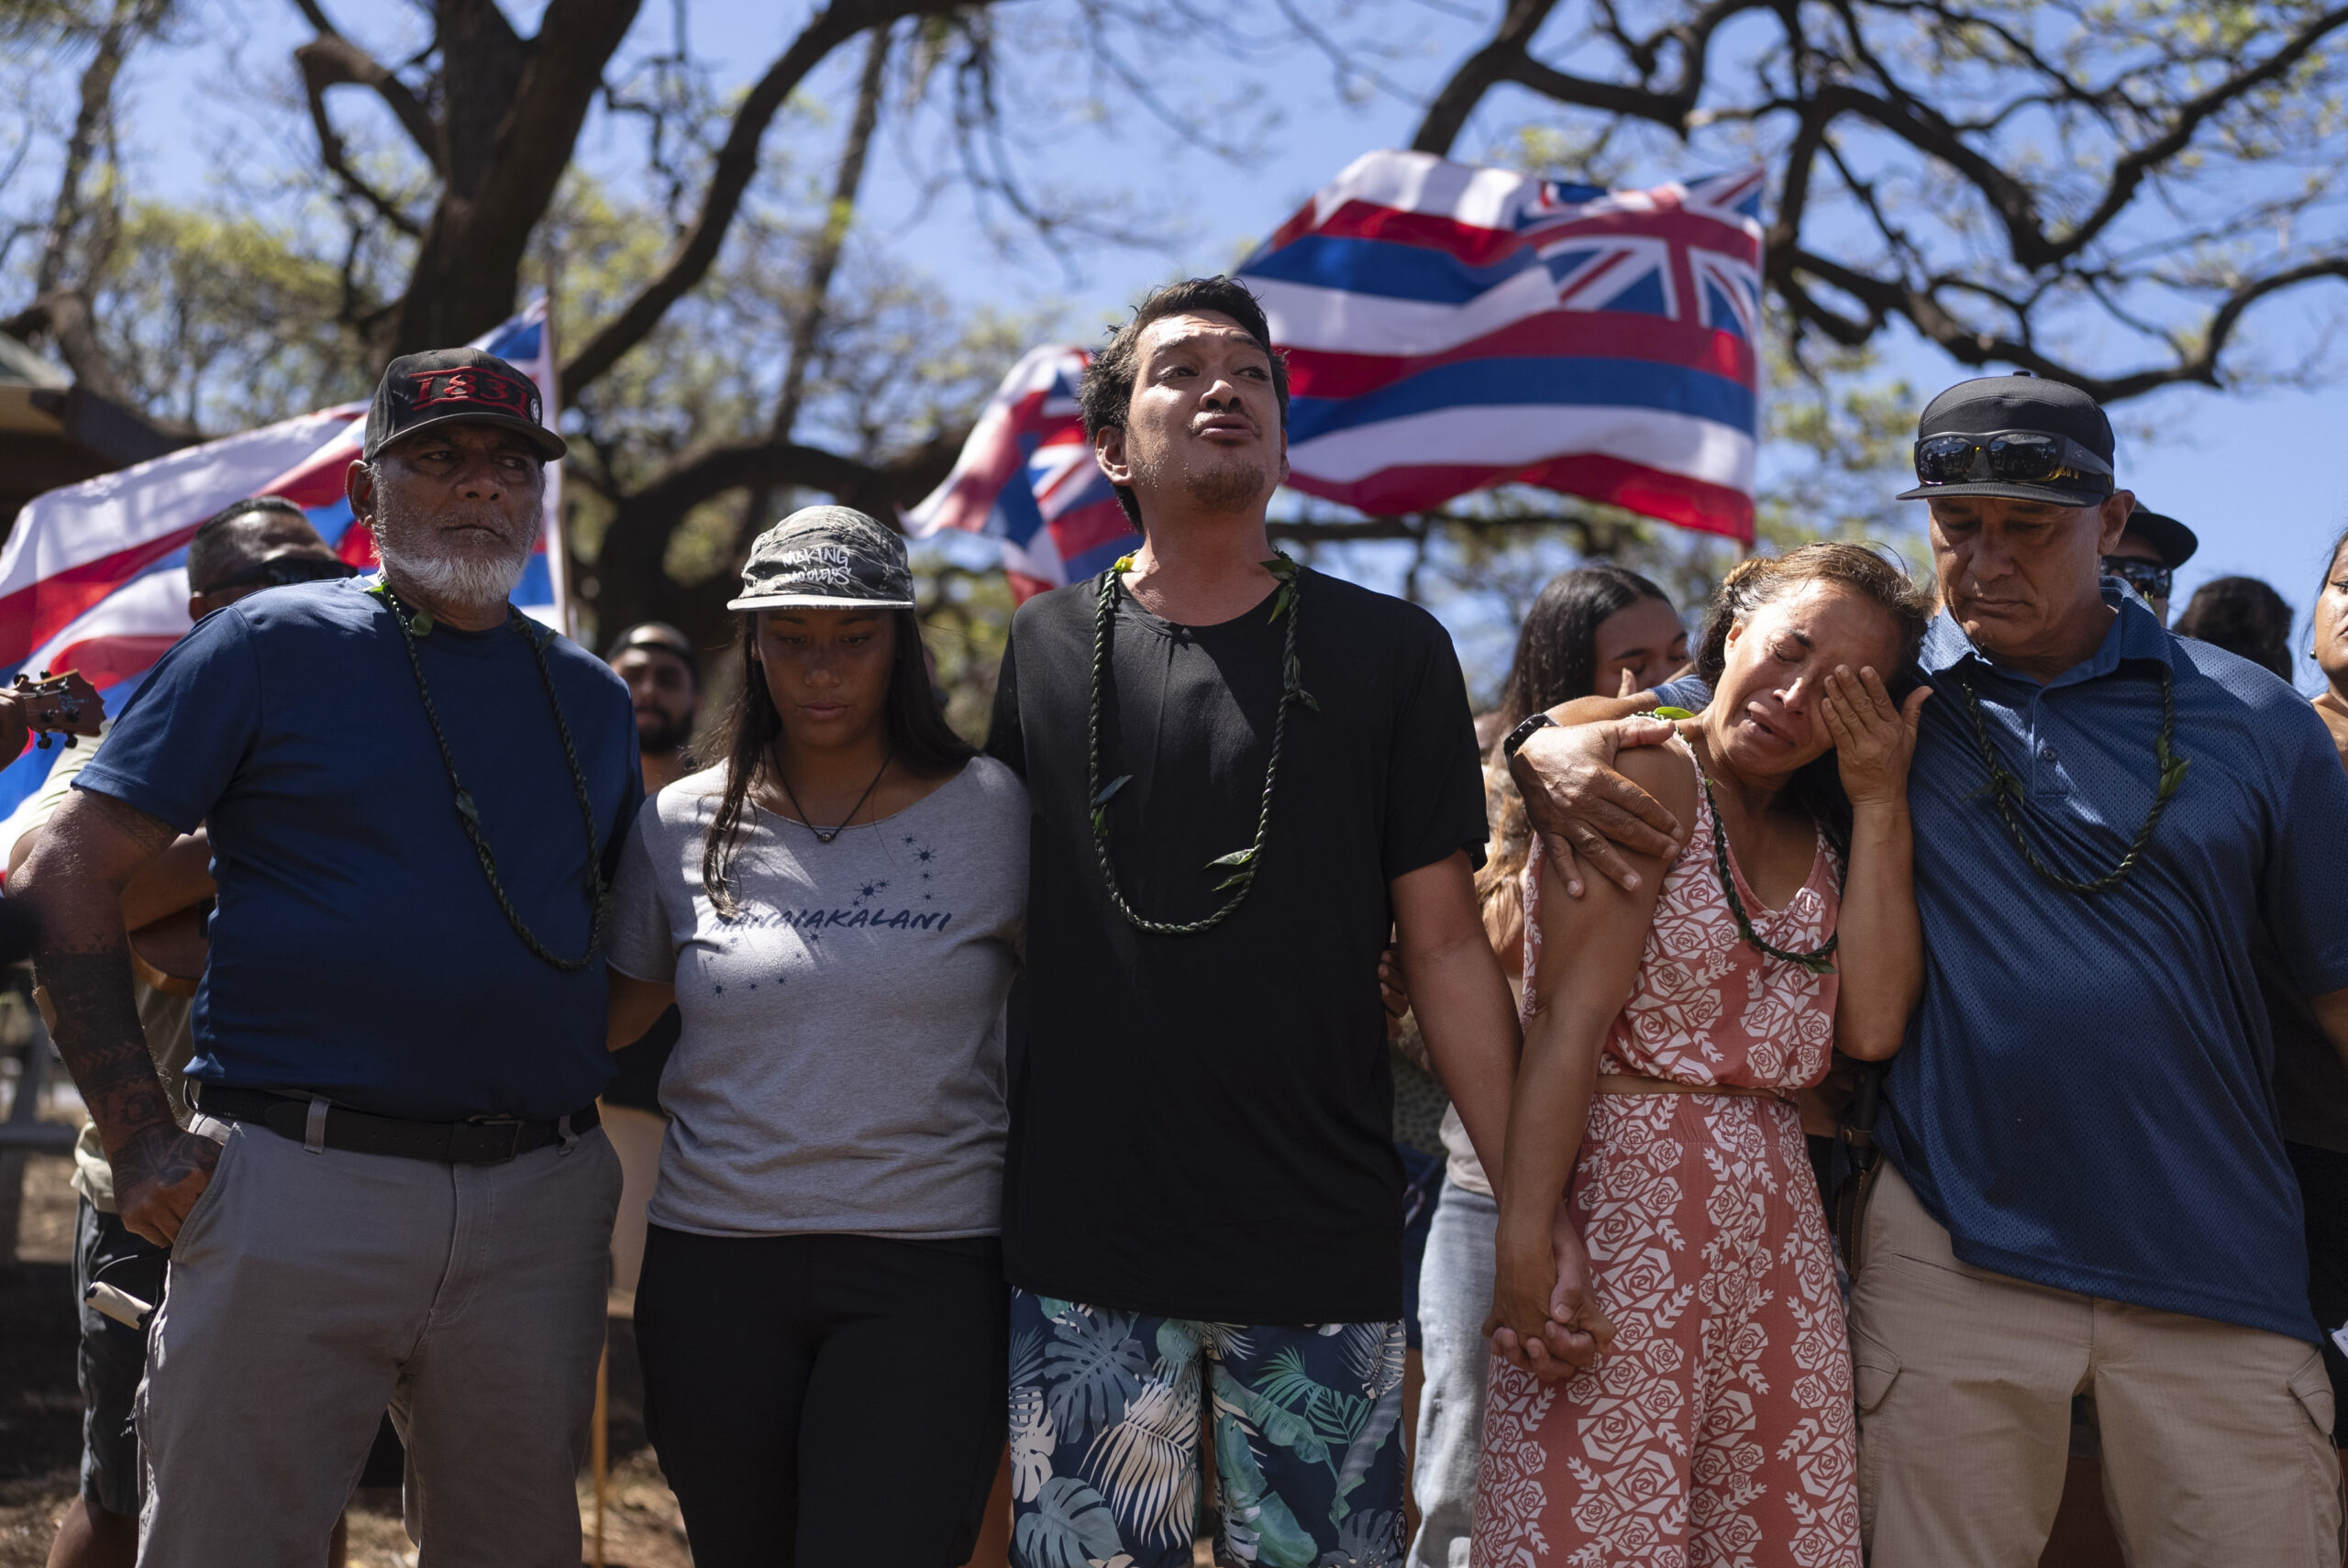 Maui town ravaged by fire will ‘rise again,’ Hawaii governor says of long recovery ahead